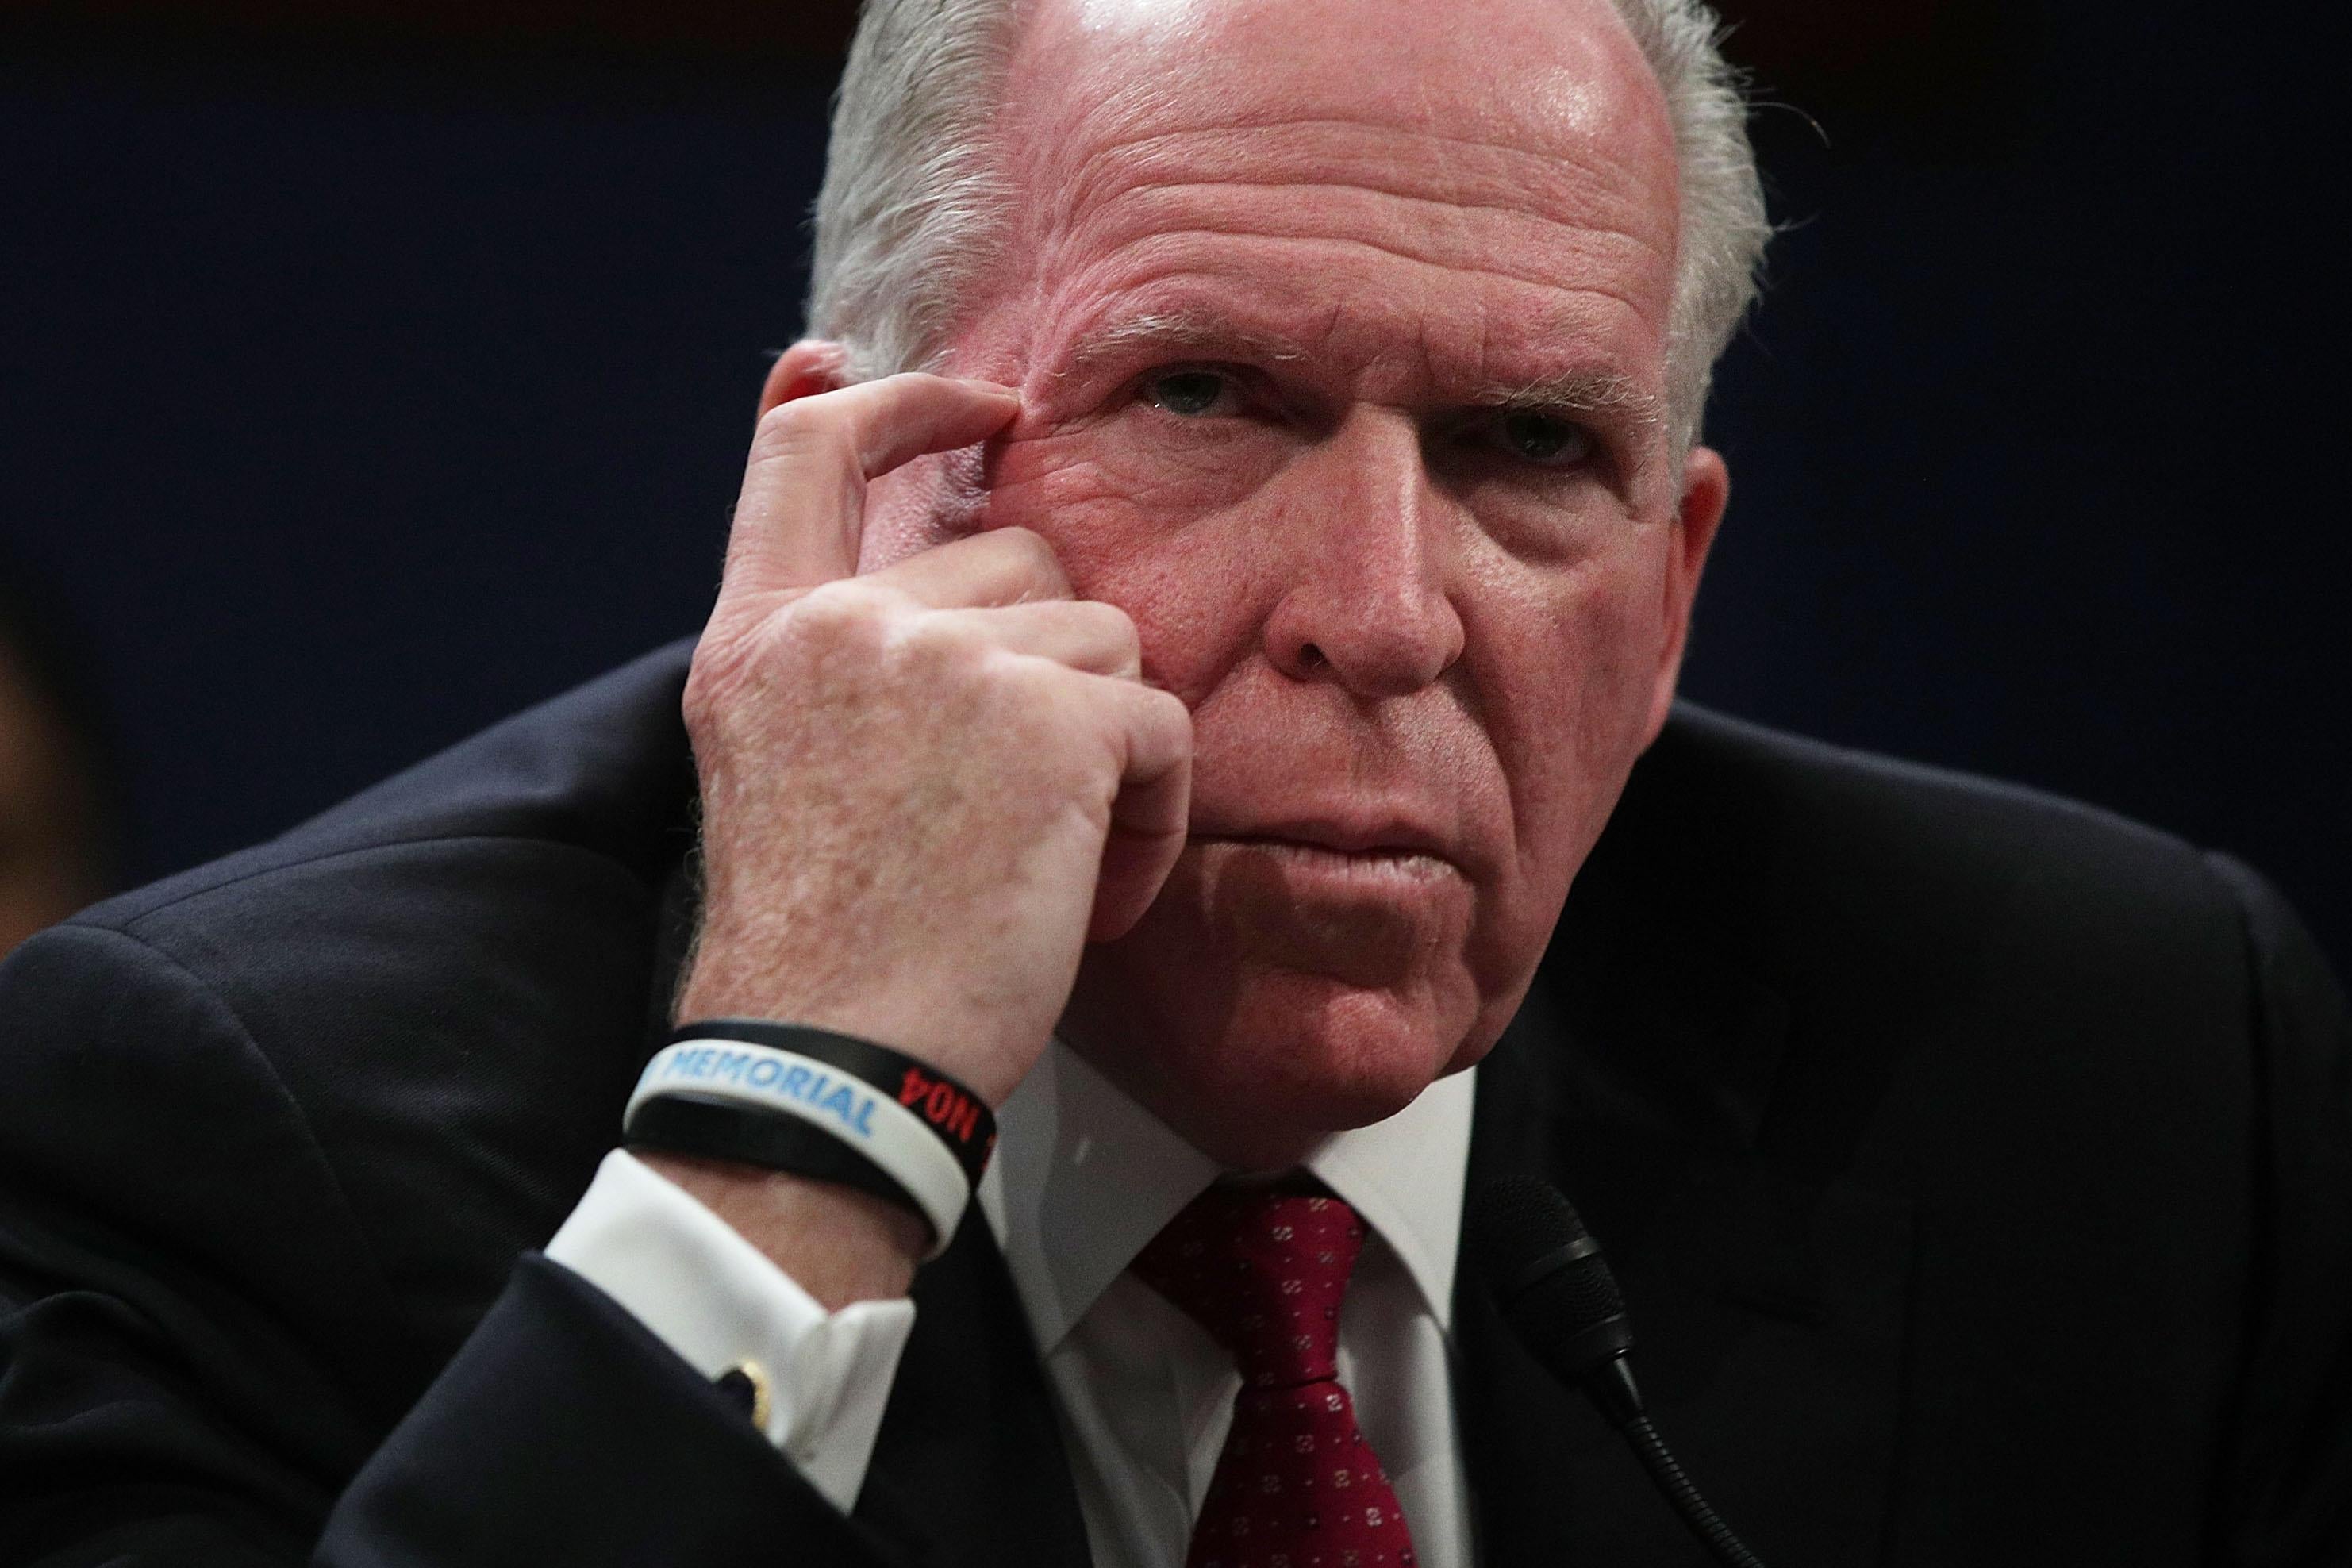 Former Director of the U.S. Central Intelligence Agency (CIA) John Brennan testifies before the House Permanent Select Committee on Intelligence on Capitol Hill, May 23, 2017 in Washington, DC. Brennan is discussing the extent of Russia's meddling in the 2016 U.S. presidential election and possible ties to the campaign of President Donald Trump.  